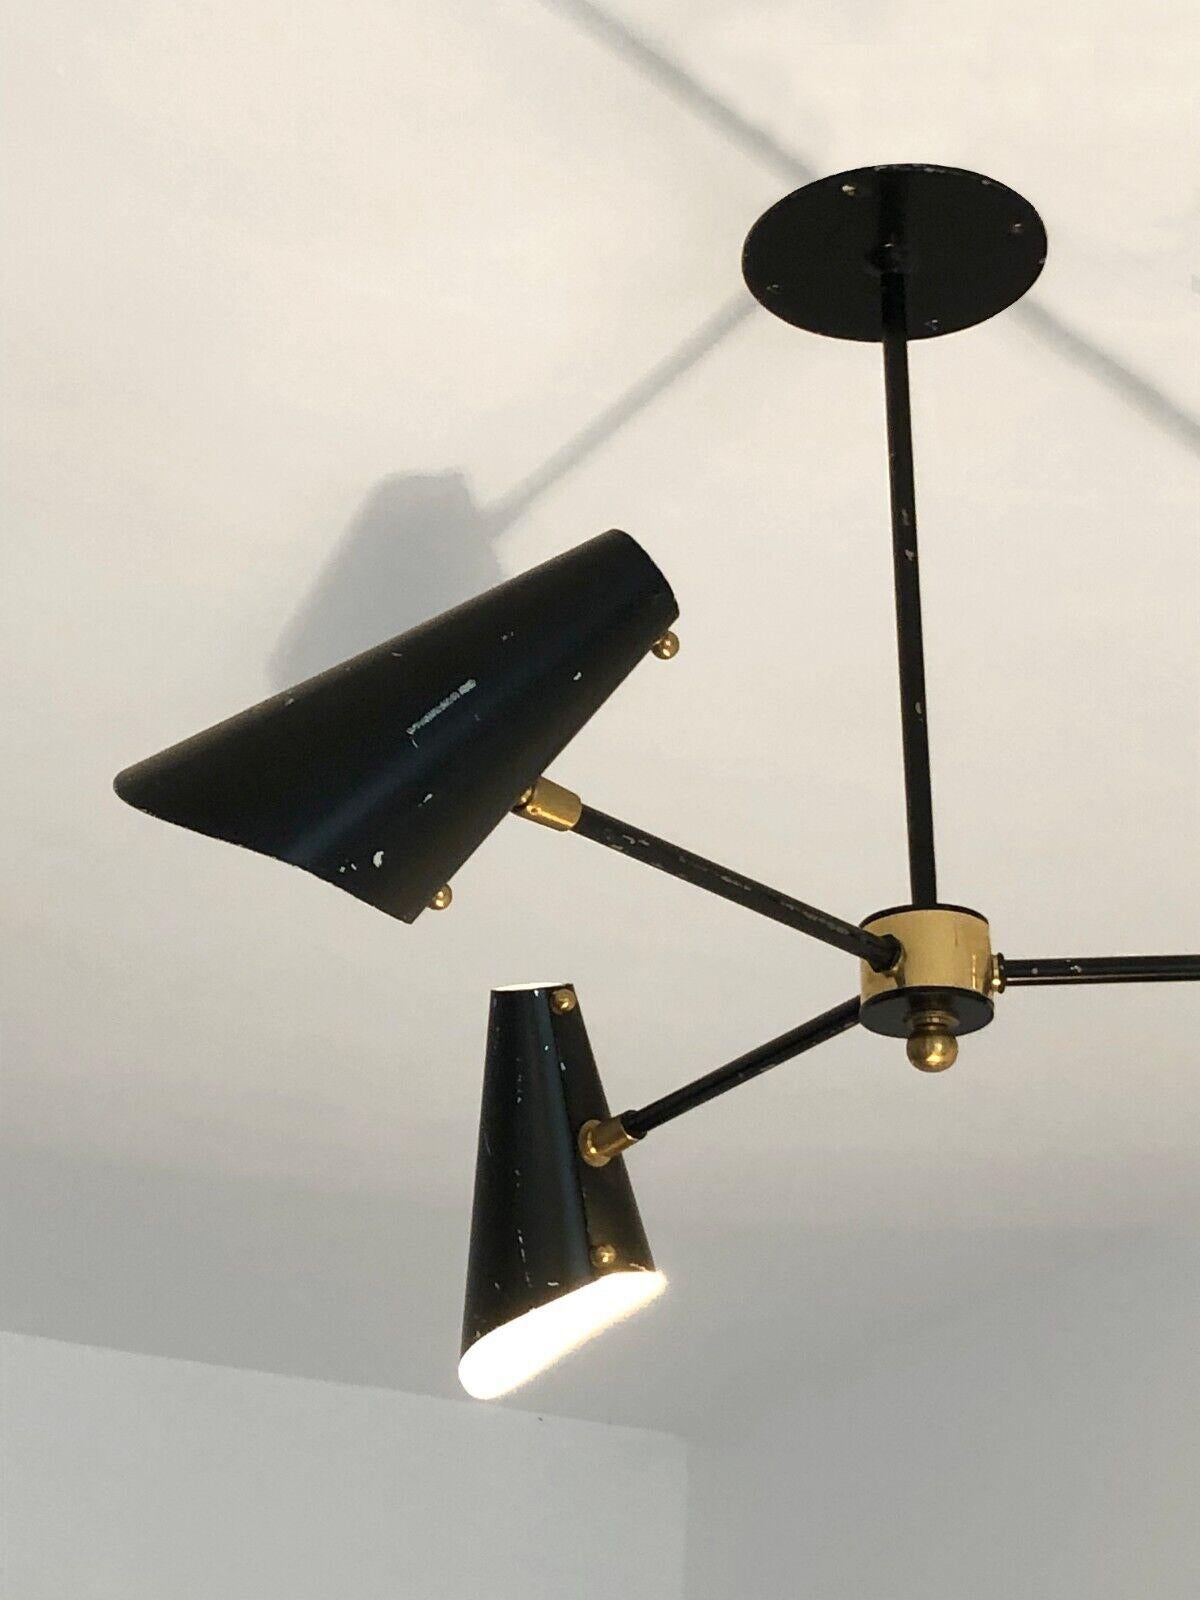 A pendant light with three arms of light, Modernist, Fifties, circular base in black lacquered metal, 3 arms of light with folded metal lampshades, golden brass finishes, to be attributed, France 1950.